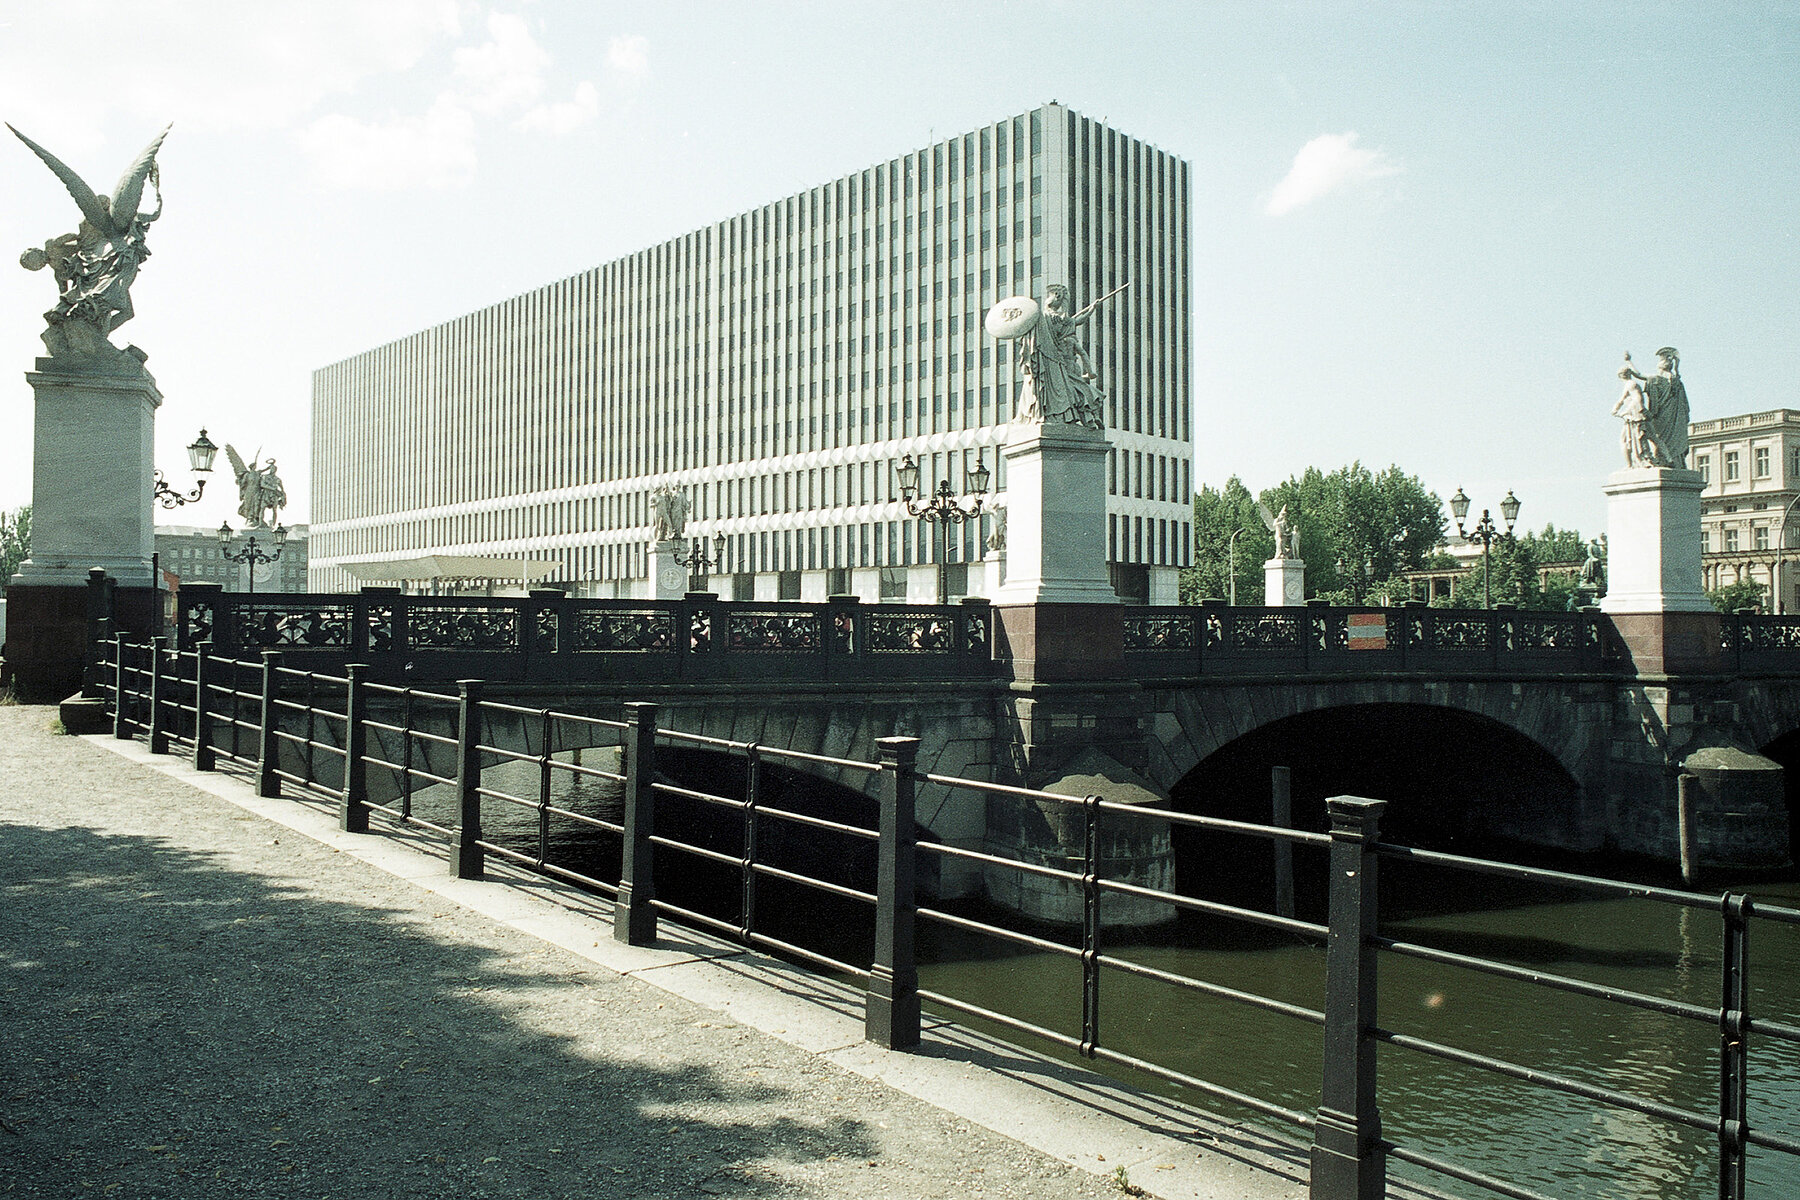 The Schlossbrücke crossing the Spree with sculptures of warriors and goddesses of victory on pedestals. In the background is the white high-rise building of the Ministry of Foreign Affairs of the GDR.